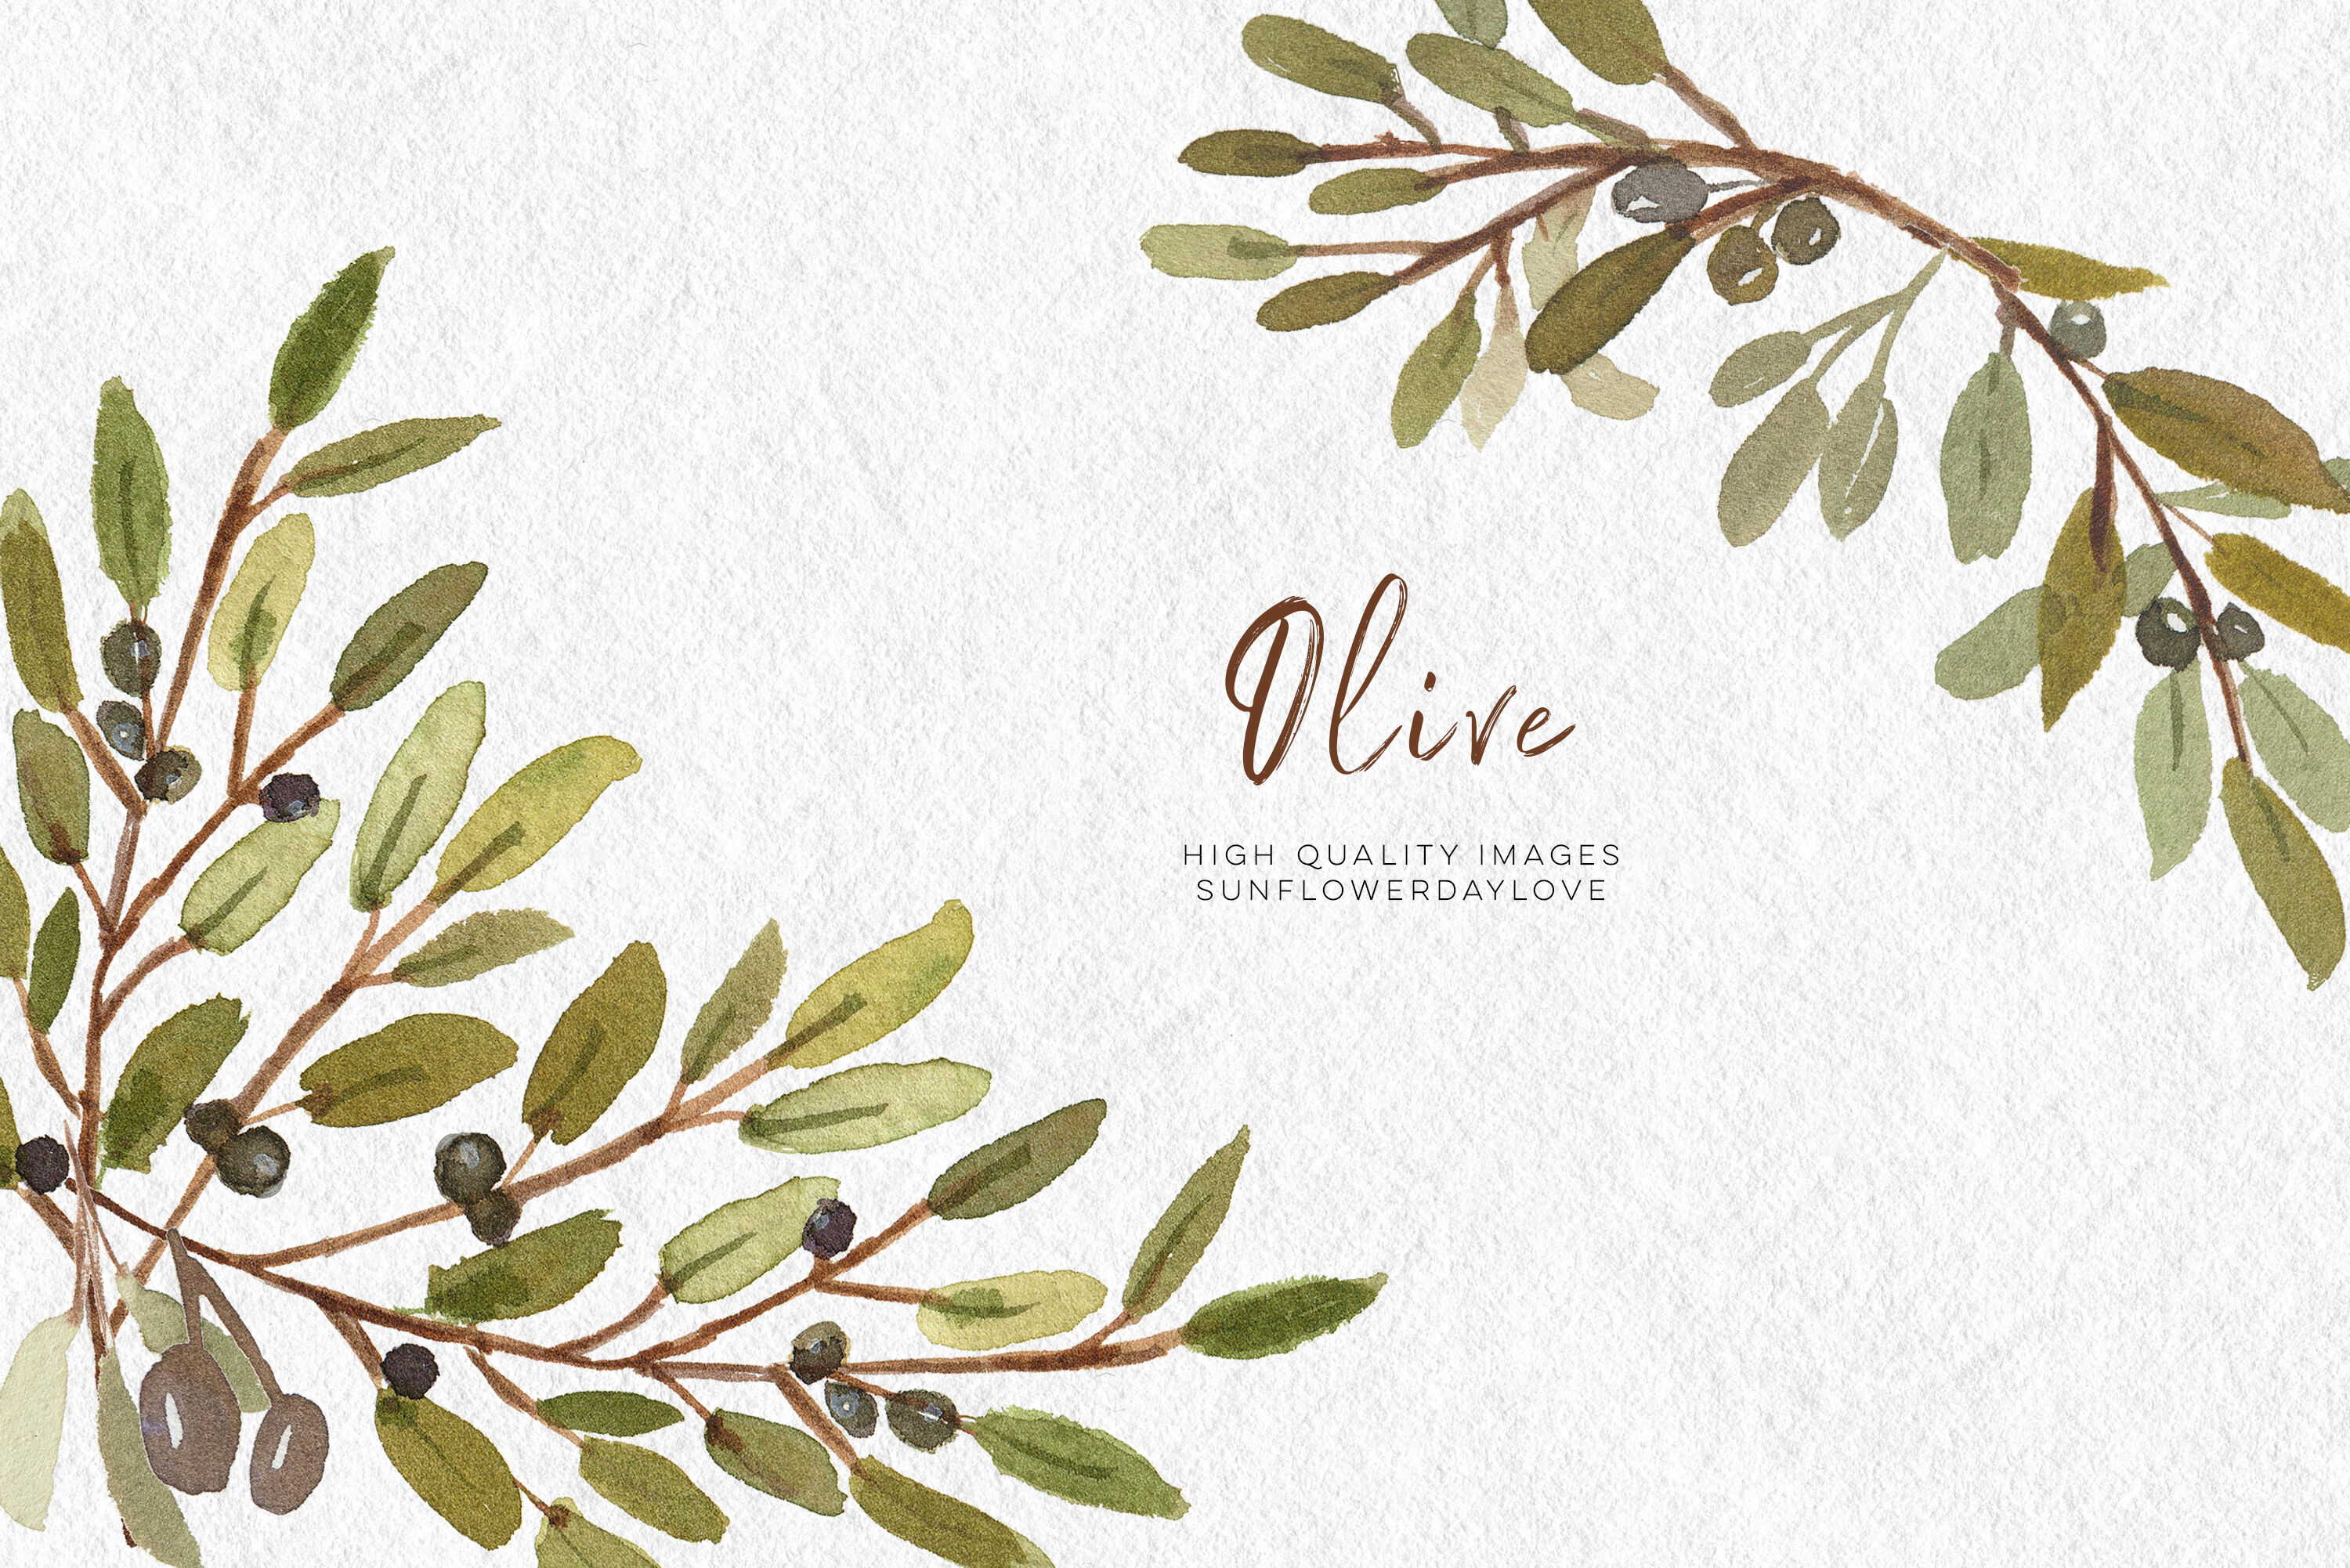 Olive Branch Watercolor Clip Art, Olive Botanical Leaves Illustrations By Sunflower Day Love | Thehungryjpeg.com